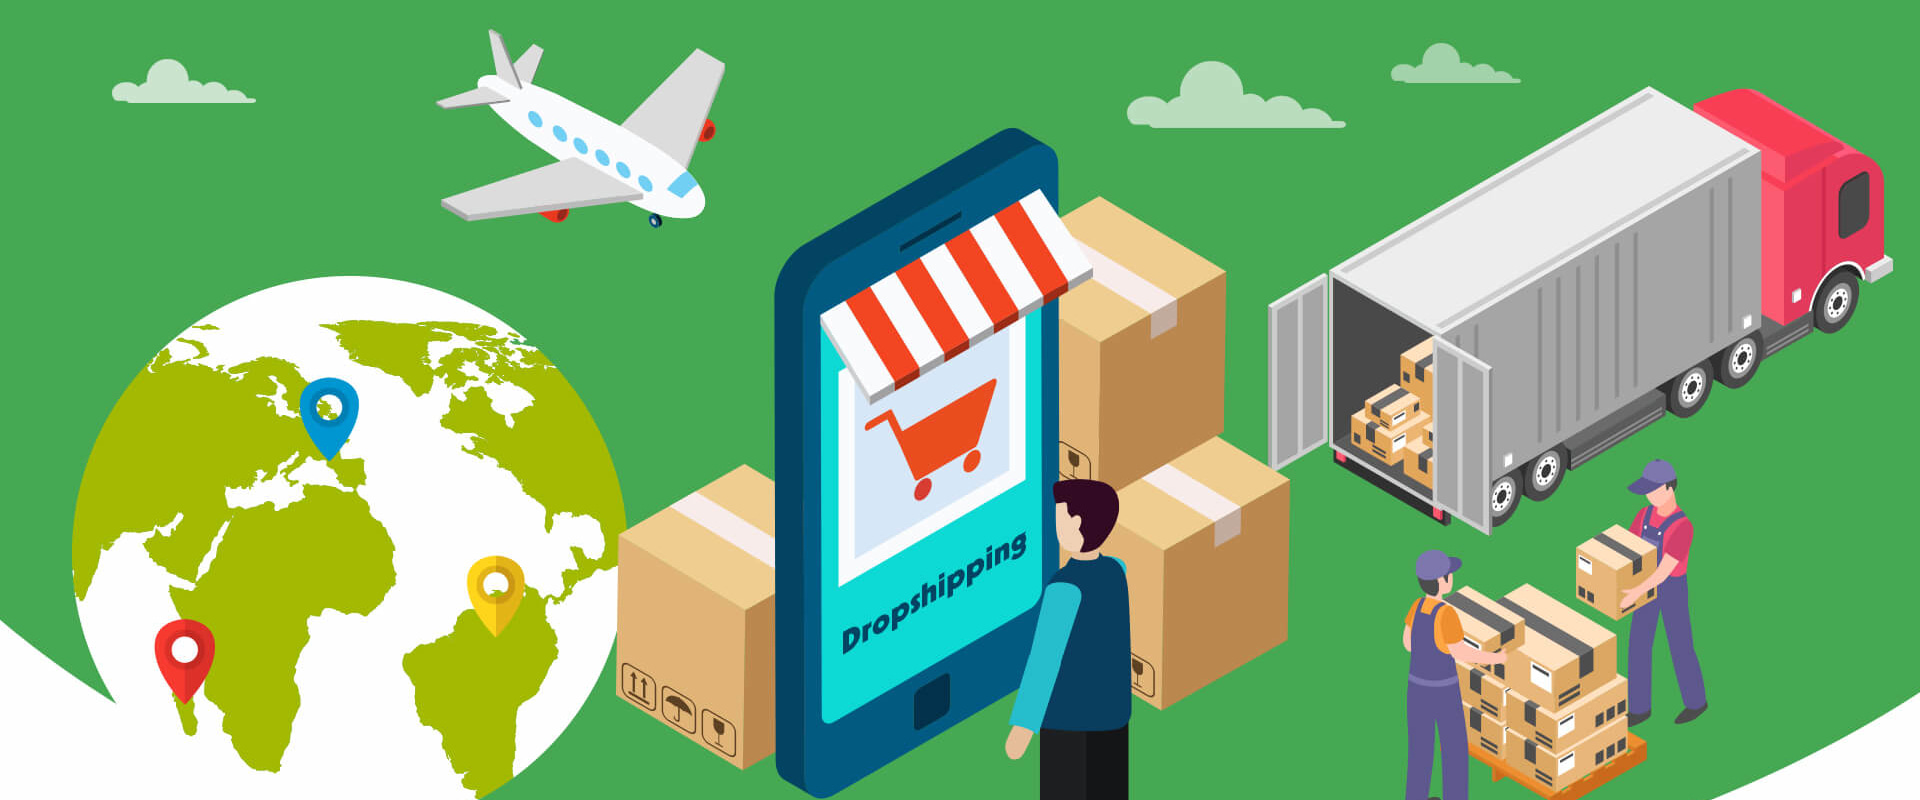 Dropshipping Business Model: An Overview